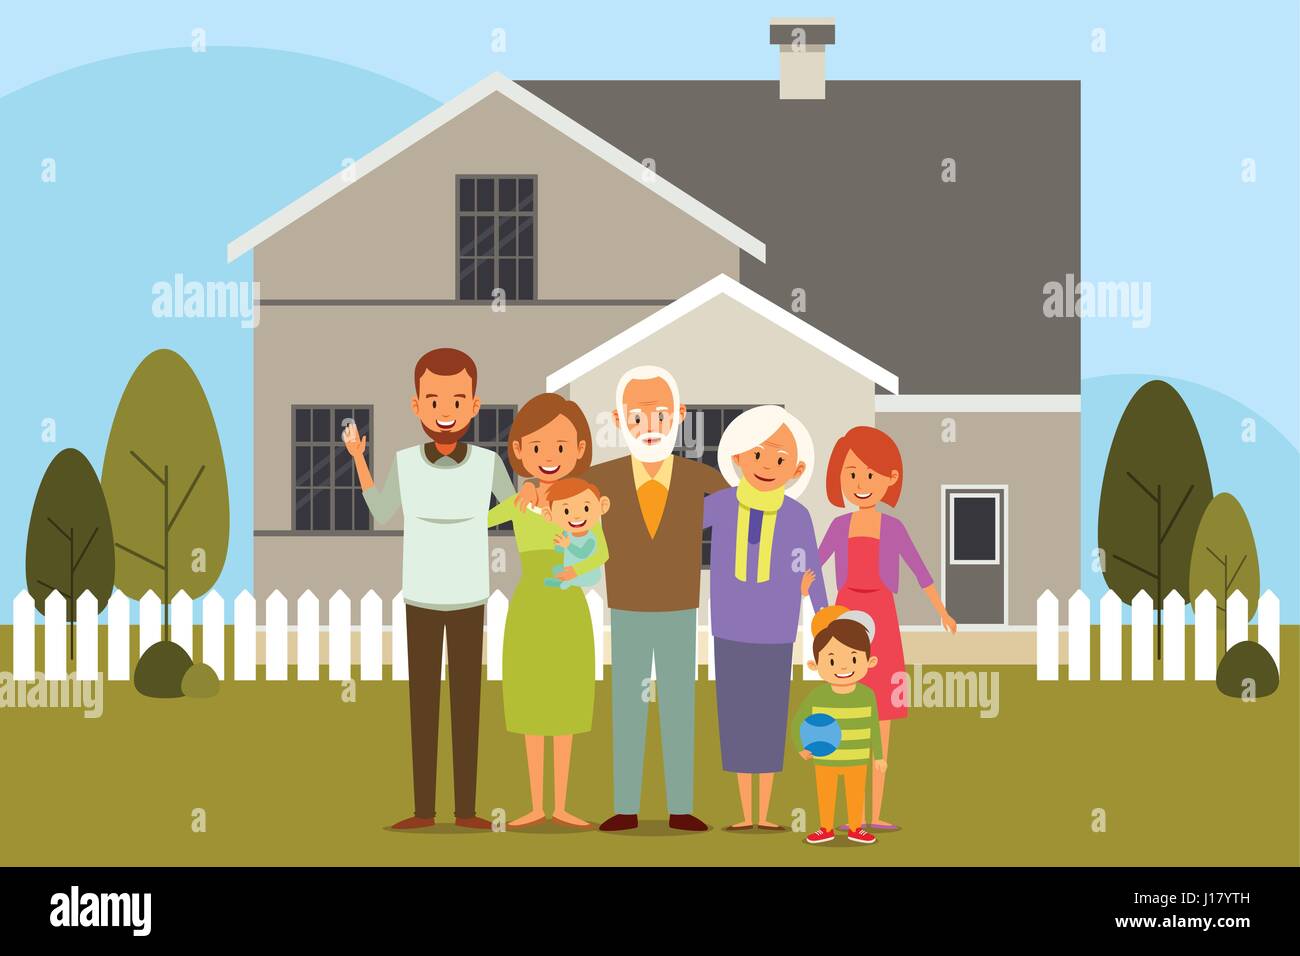 A vector illustration of Multi Generation Family in Front of a House Stock Vector